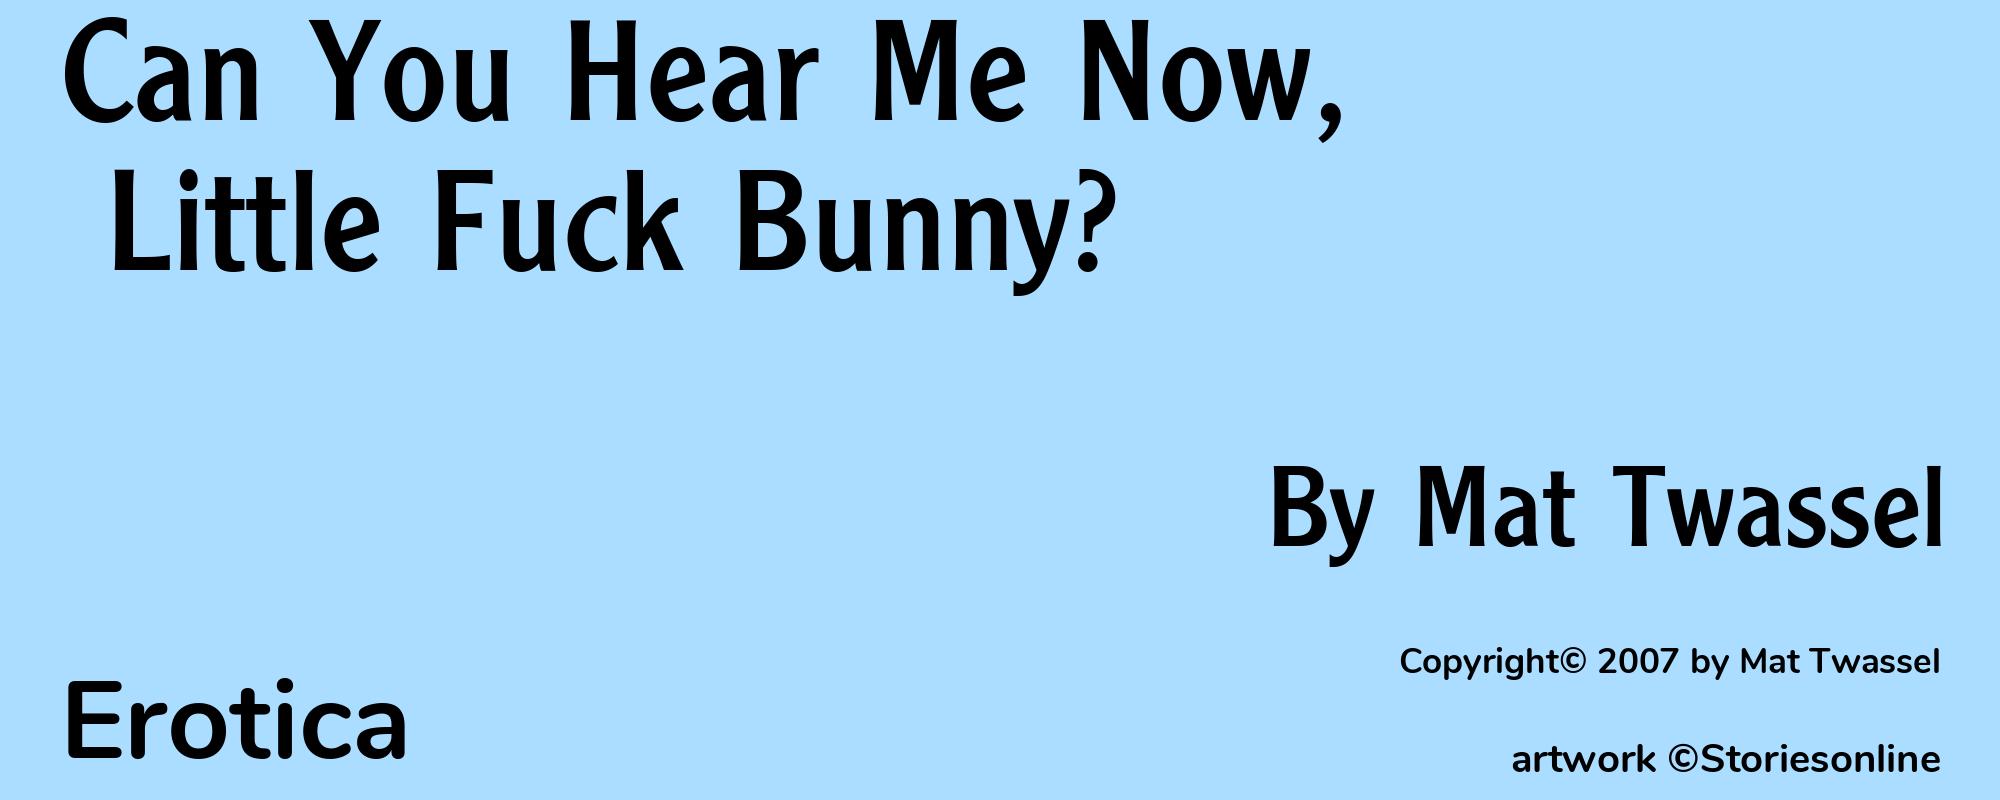 Can You Hear Me Now, Little Fuck Bunny? - Cover